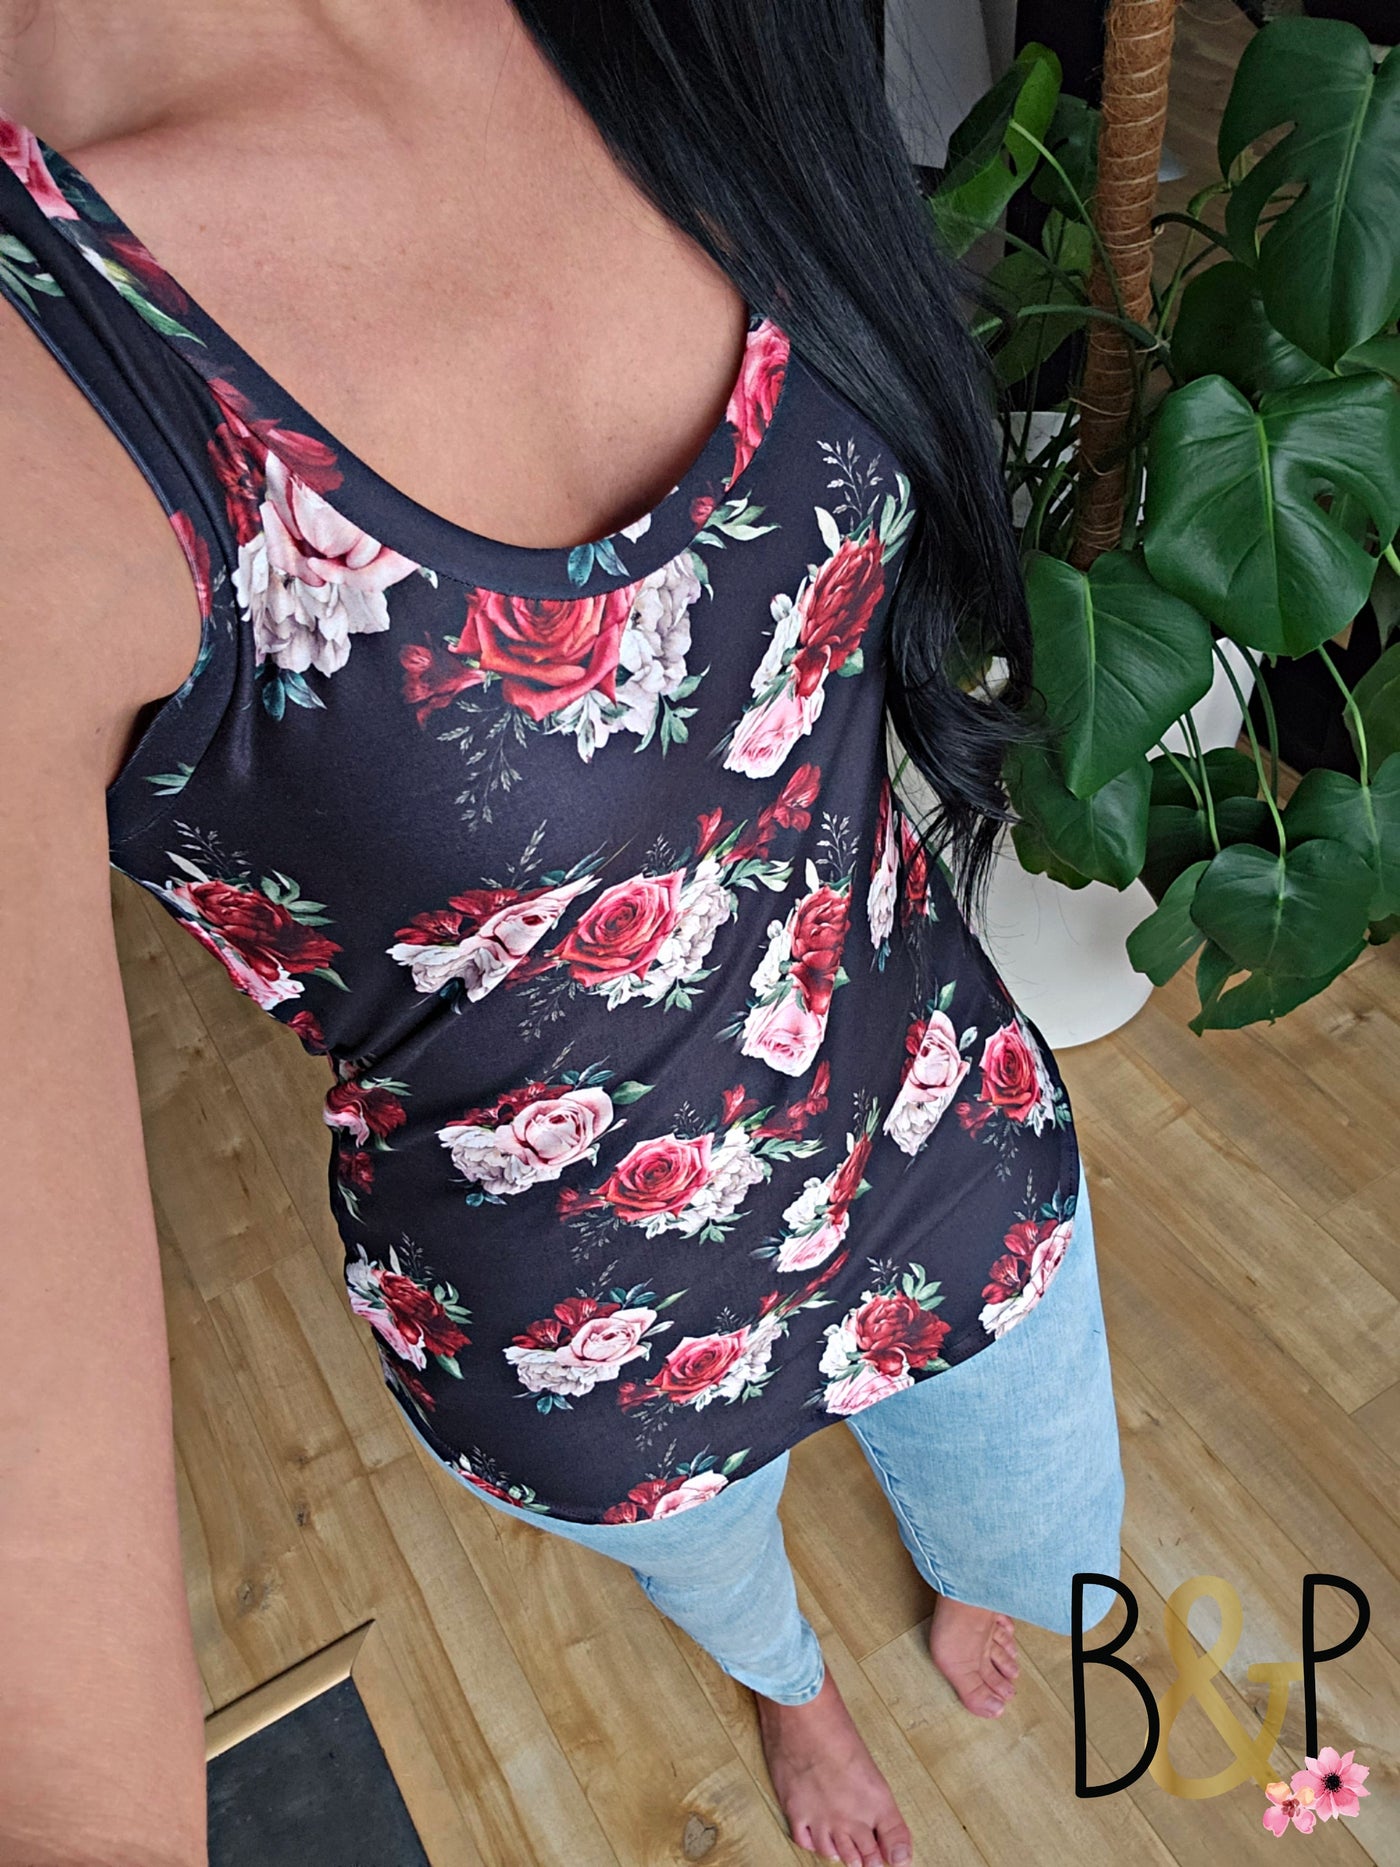 Camisole petits rosiers rouges